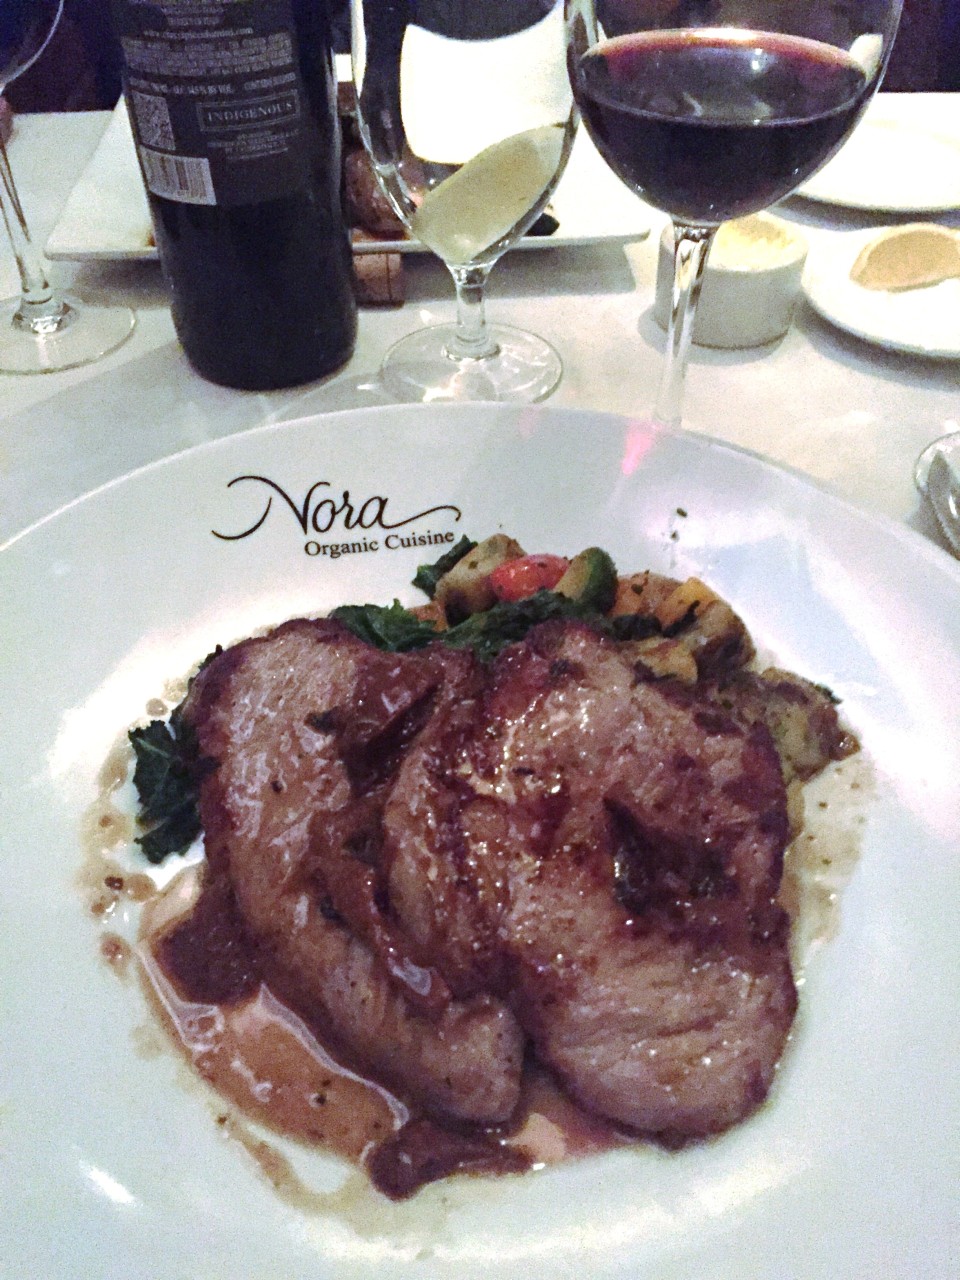 Sauteed Veal Escalopes with Housemade Gnocchi, Garlicky Kale, Brussel Sprouts, Peppers, Chanterelle Mushroom Sauce